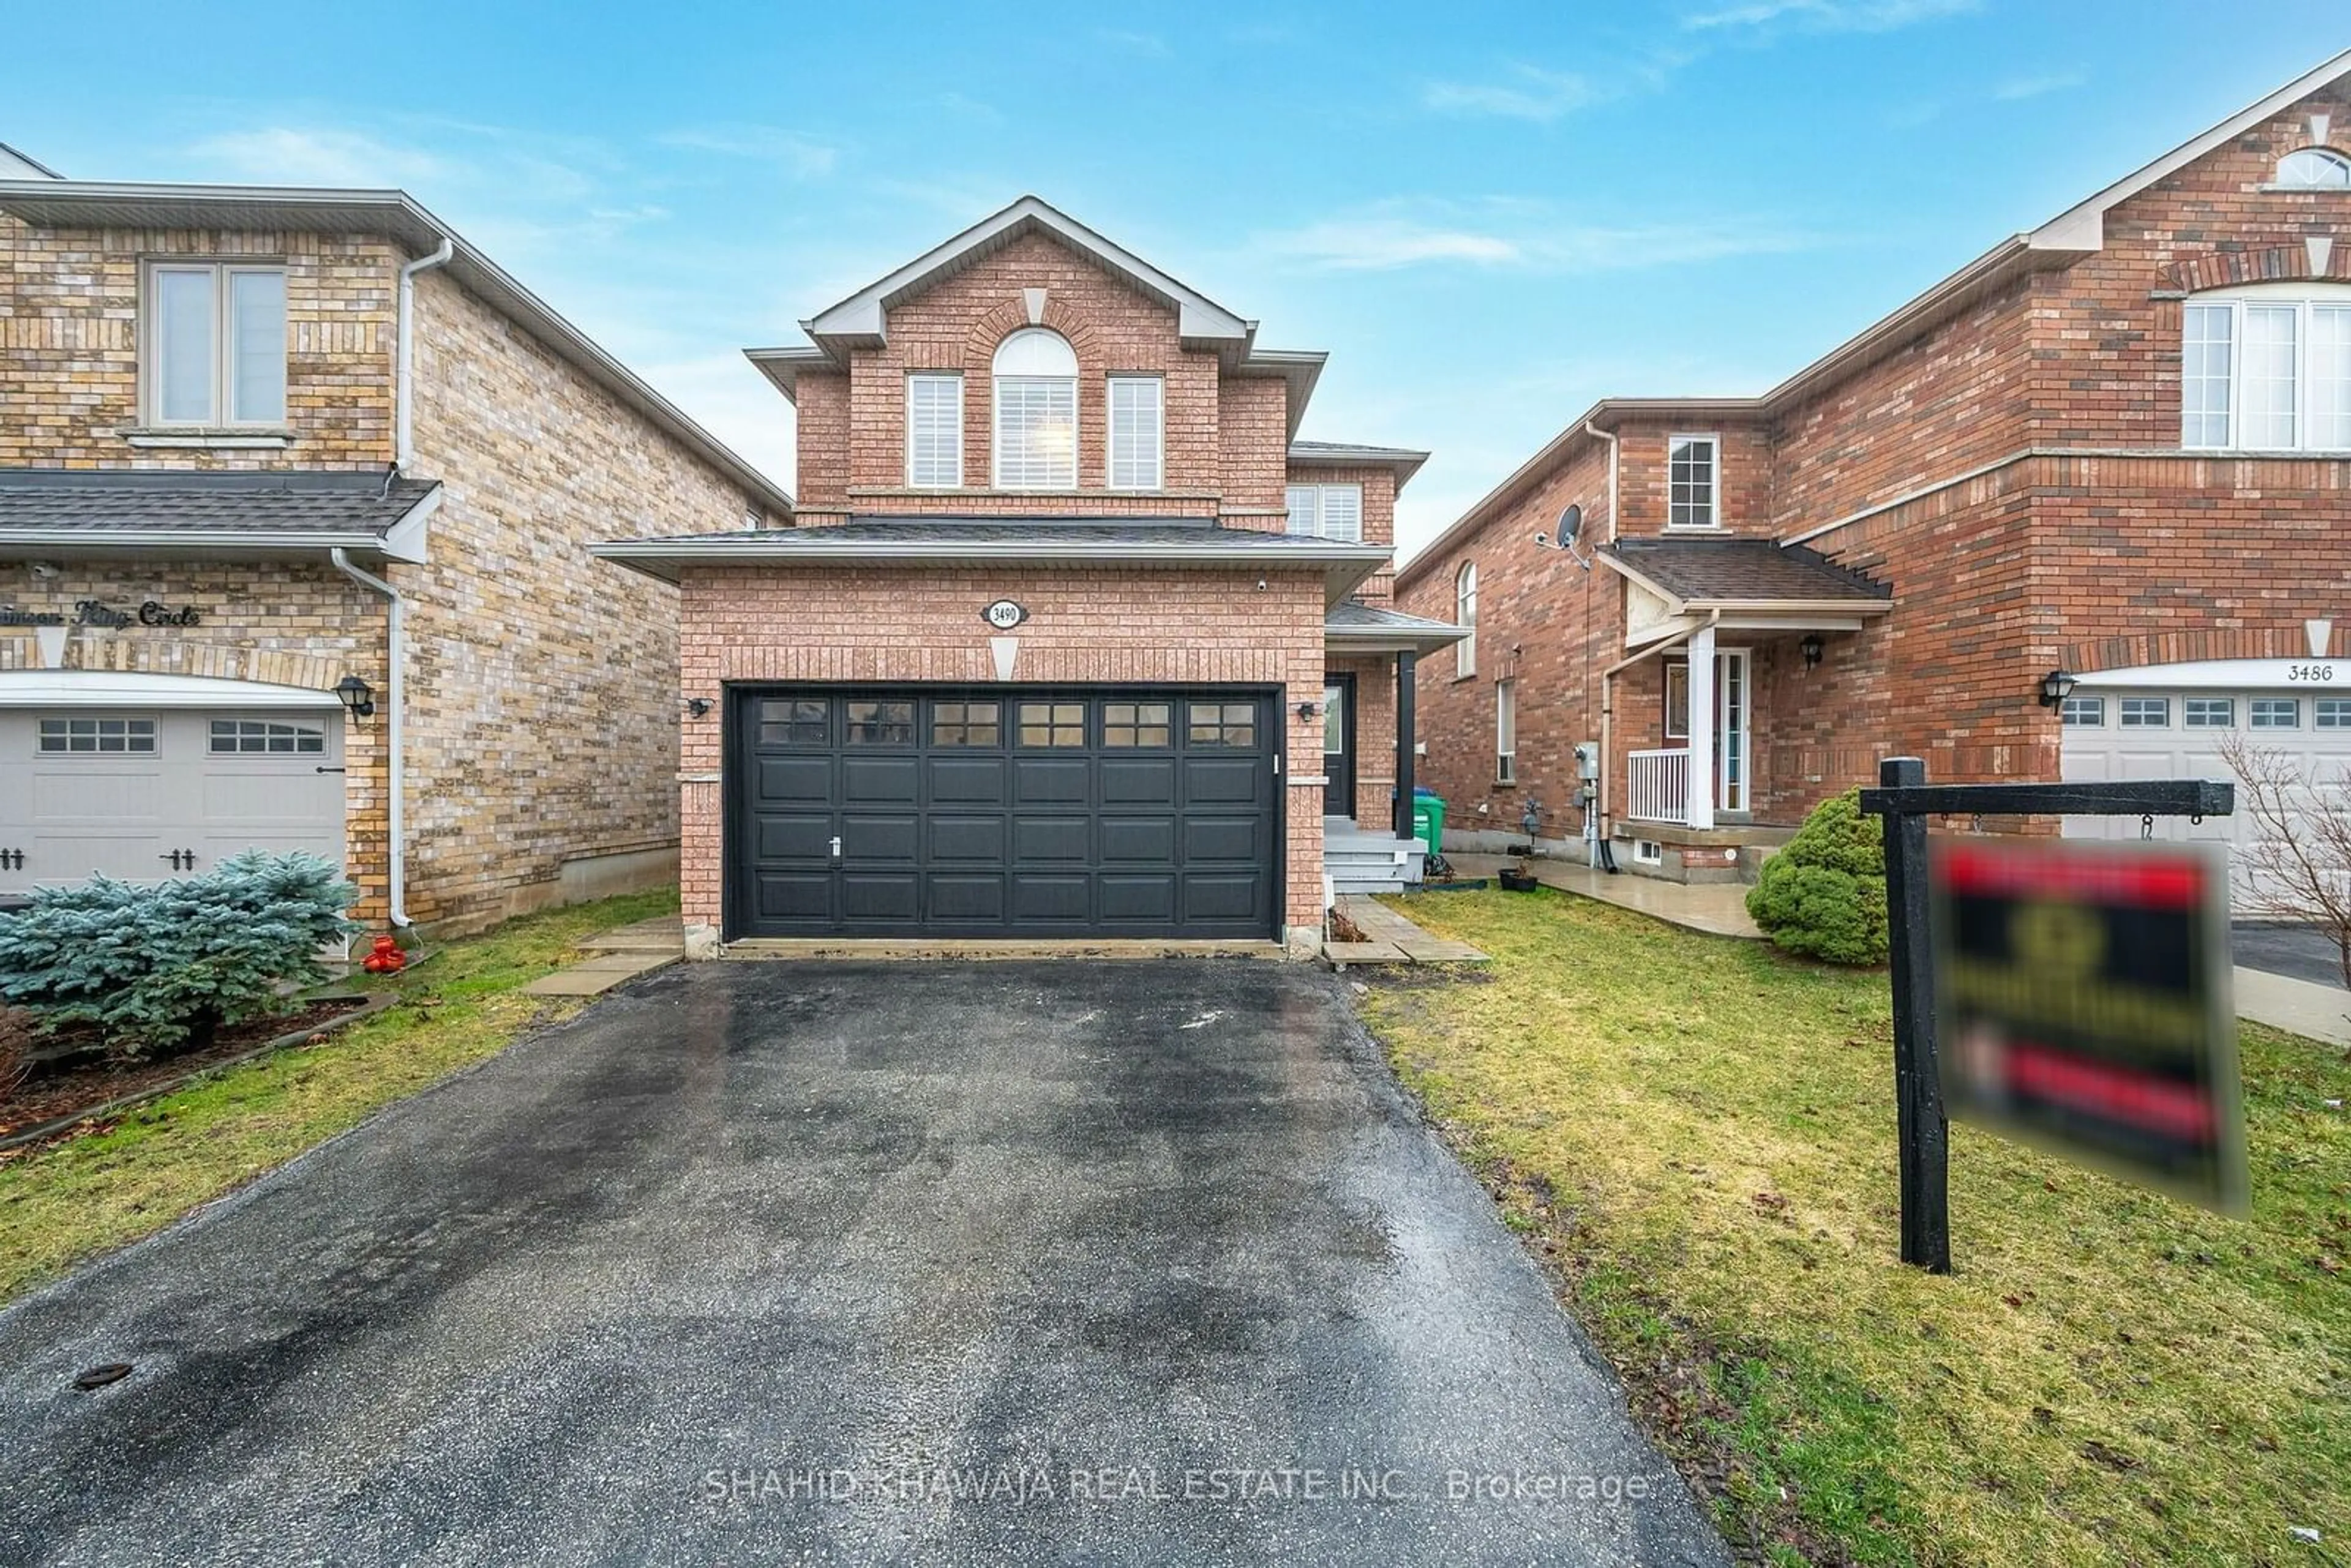 Home with brick exterior material for 3490 Crimson King Circ, Mississauga Ontario L5N 8M8